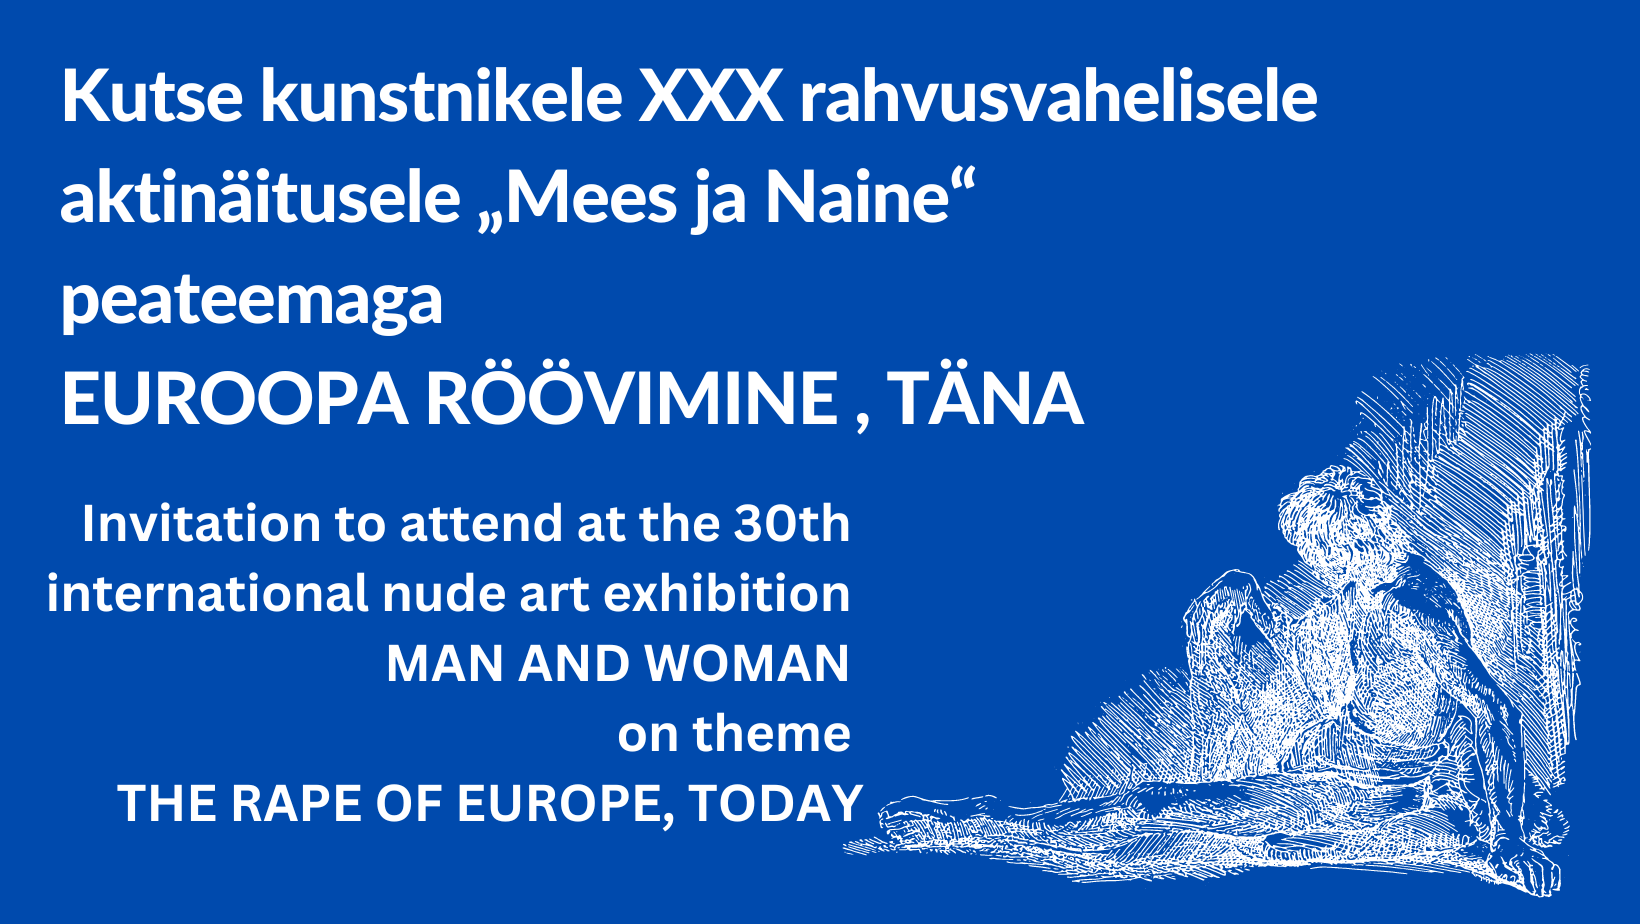 Full Rape Videos Xxxx - Invitation to attend at the 30th international nude art exhibition MAN AND  WOMAN on theme THE RAPE OF EUROPE, TODAY. - UKM